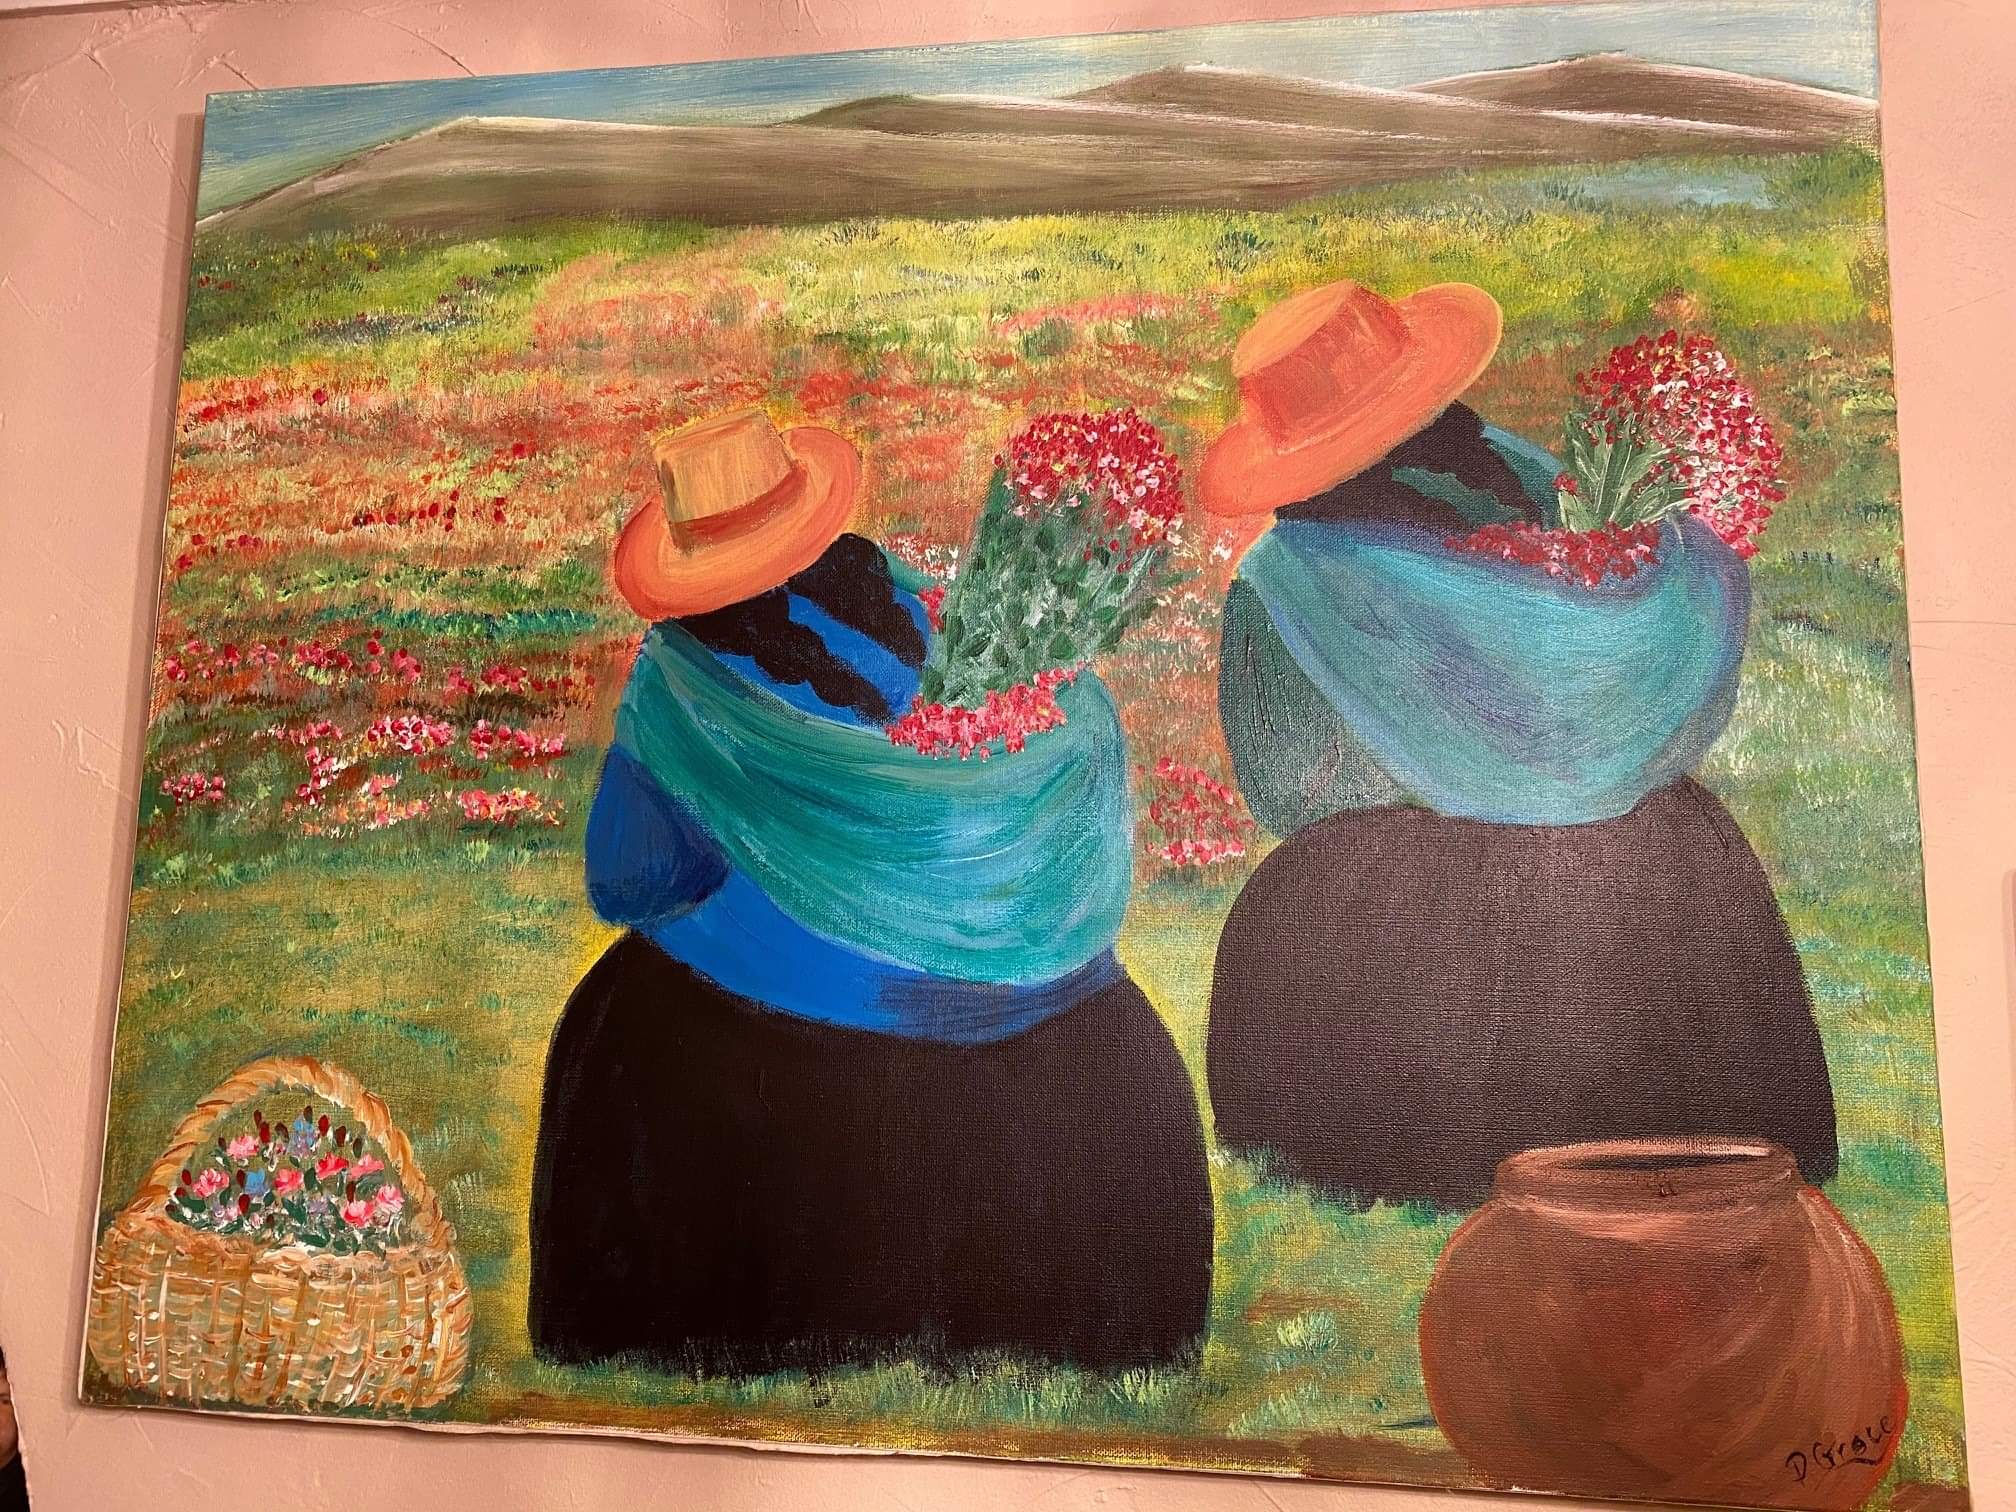 Patricia Groce painting - two women in a field of flowers